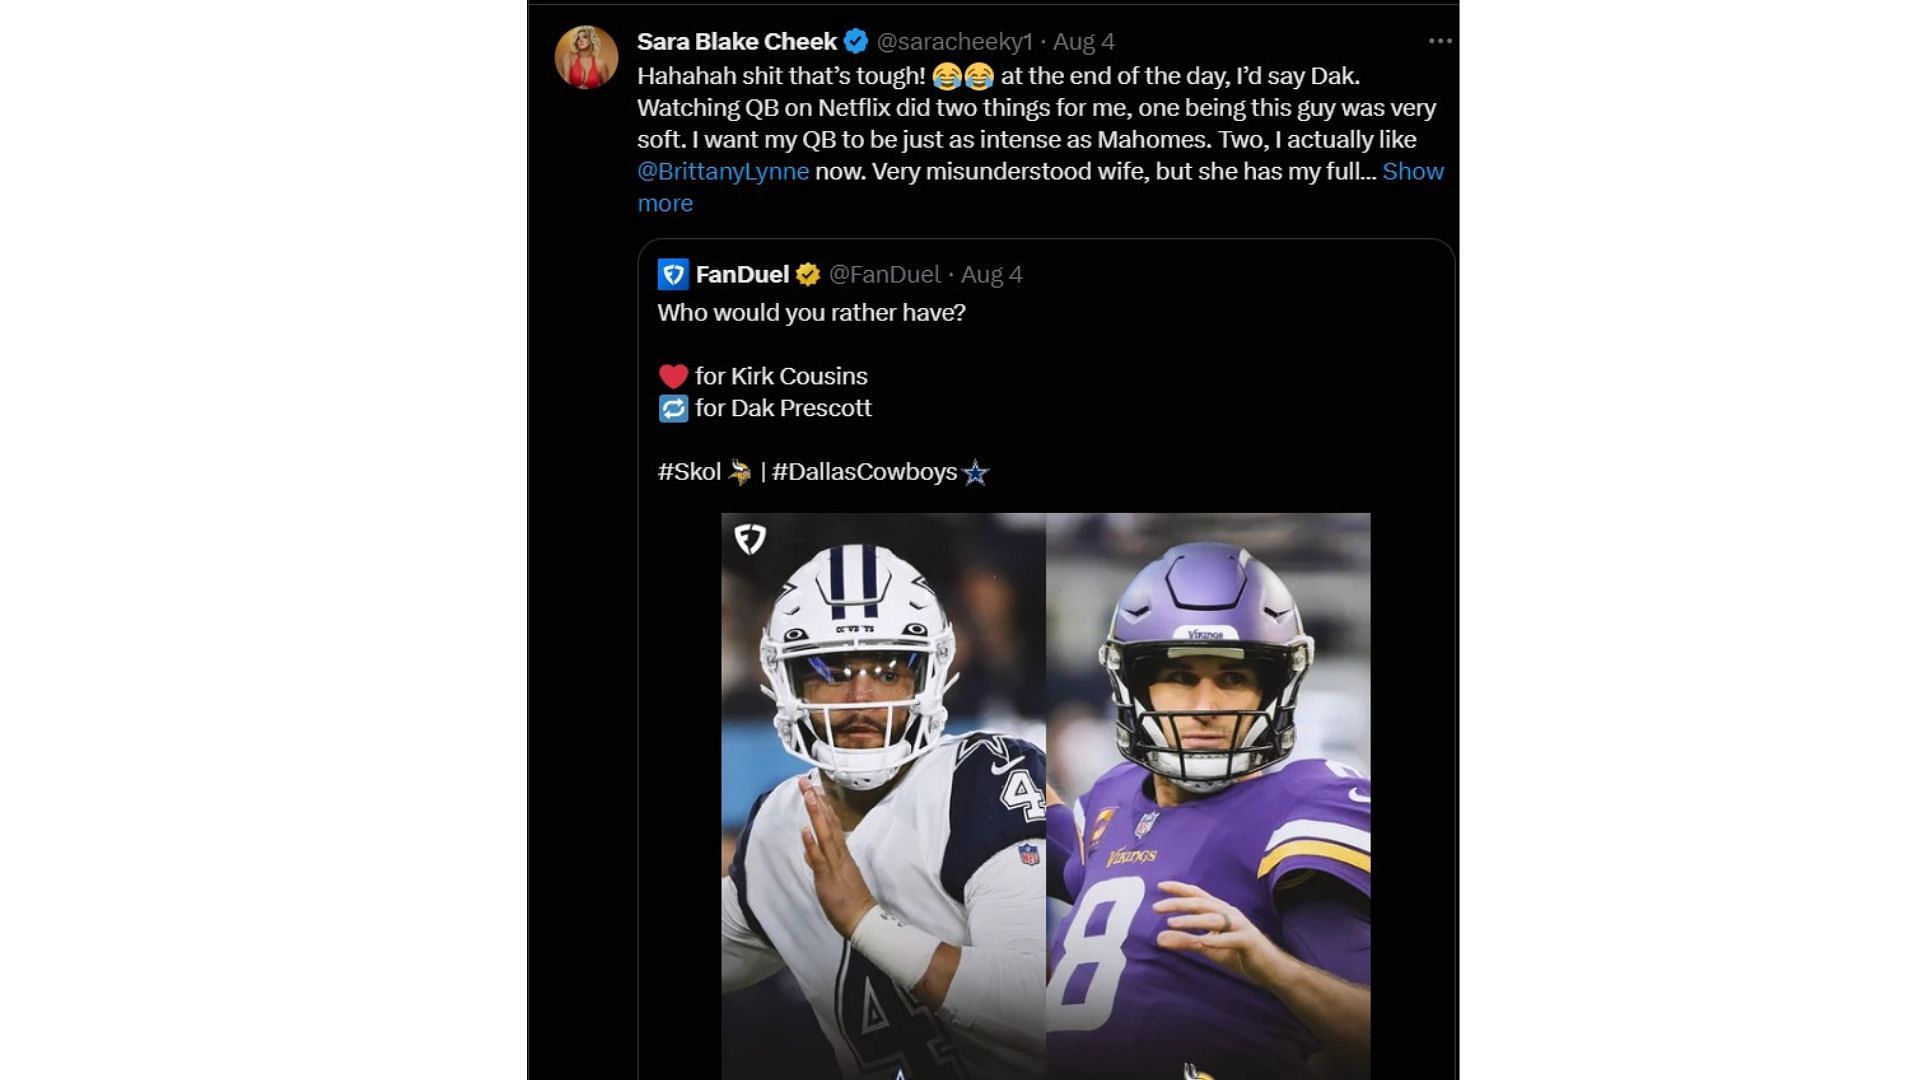 Image Credit: Brittany Mahomes&#039; Twitter timeline